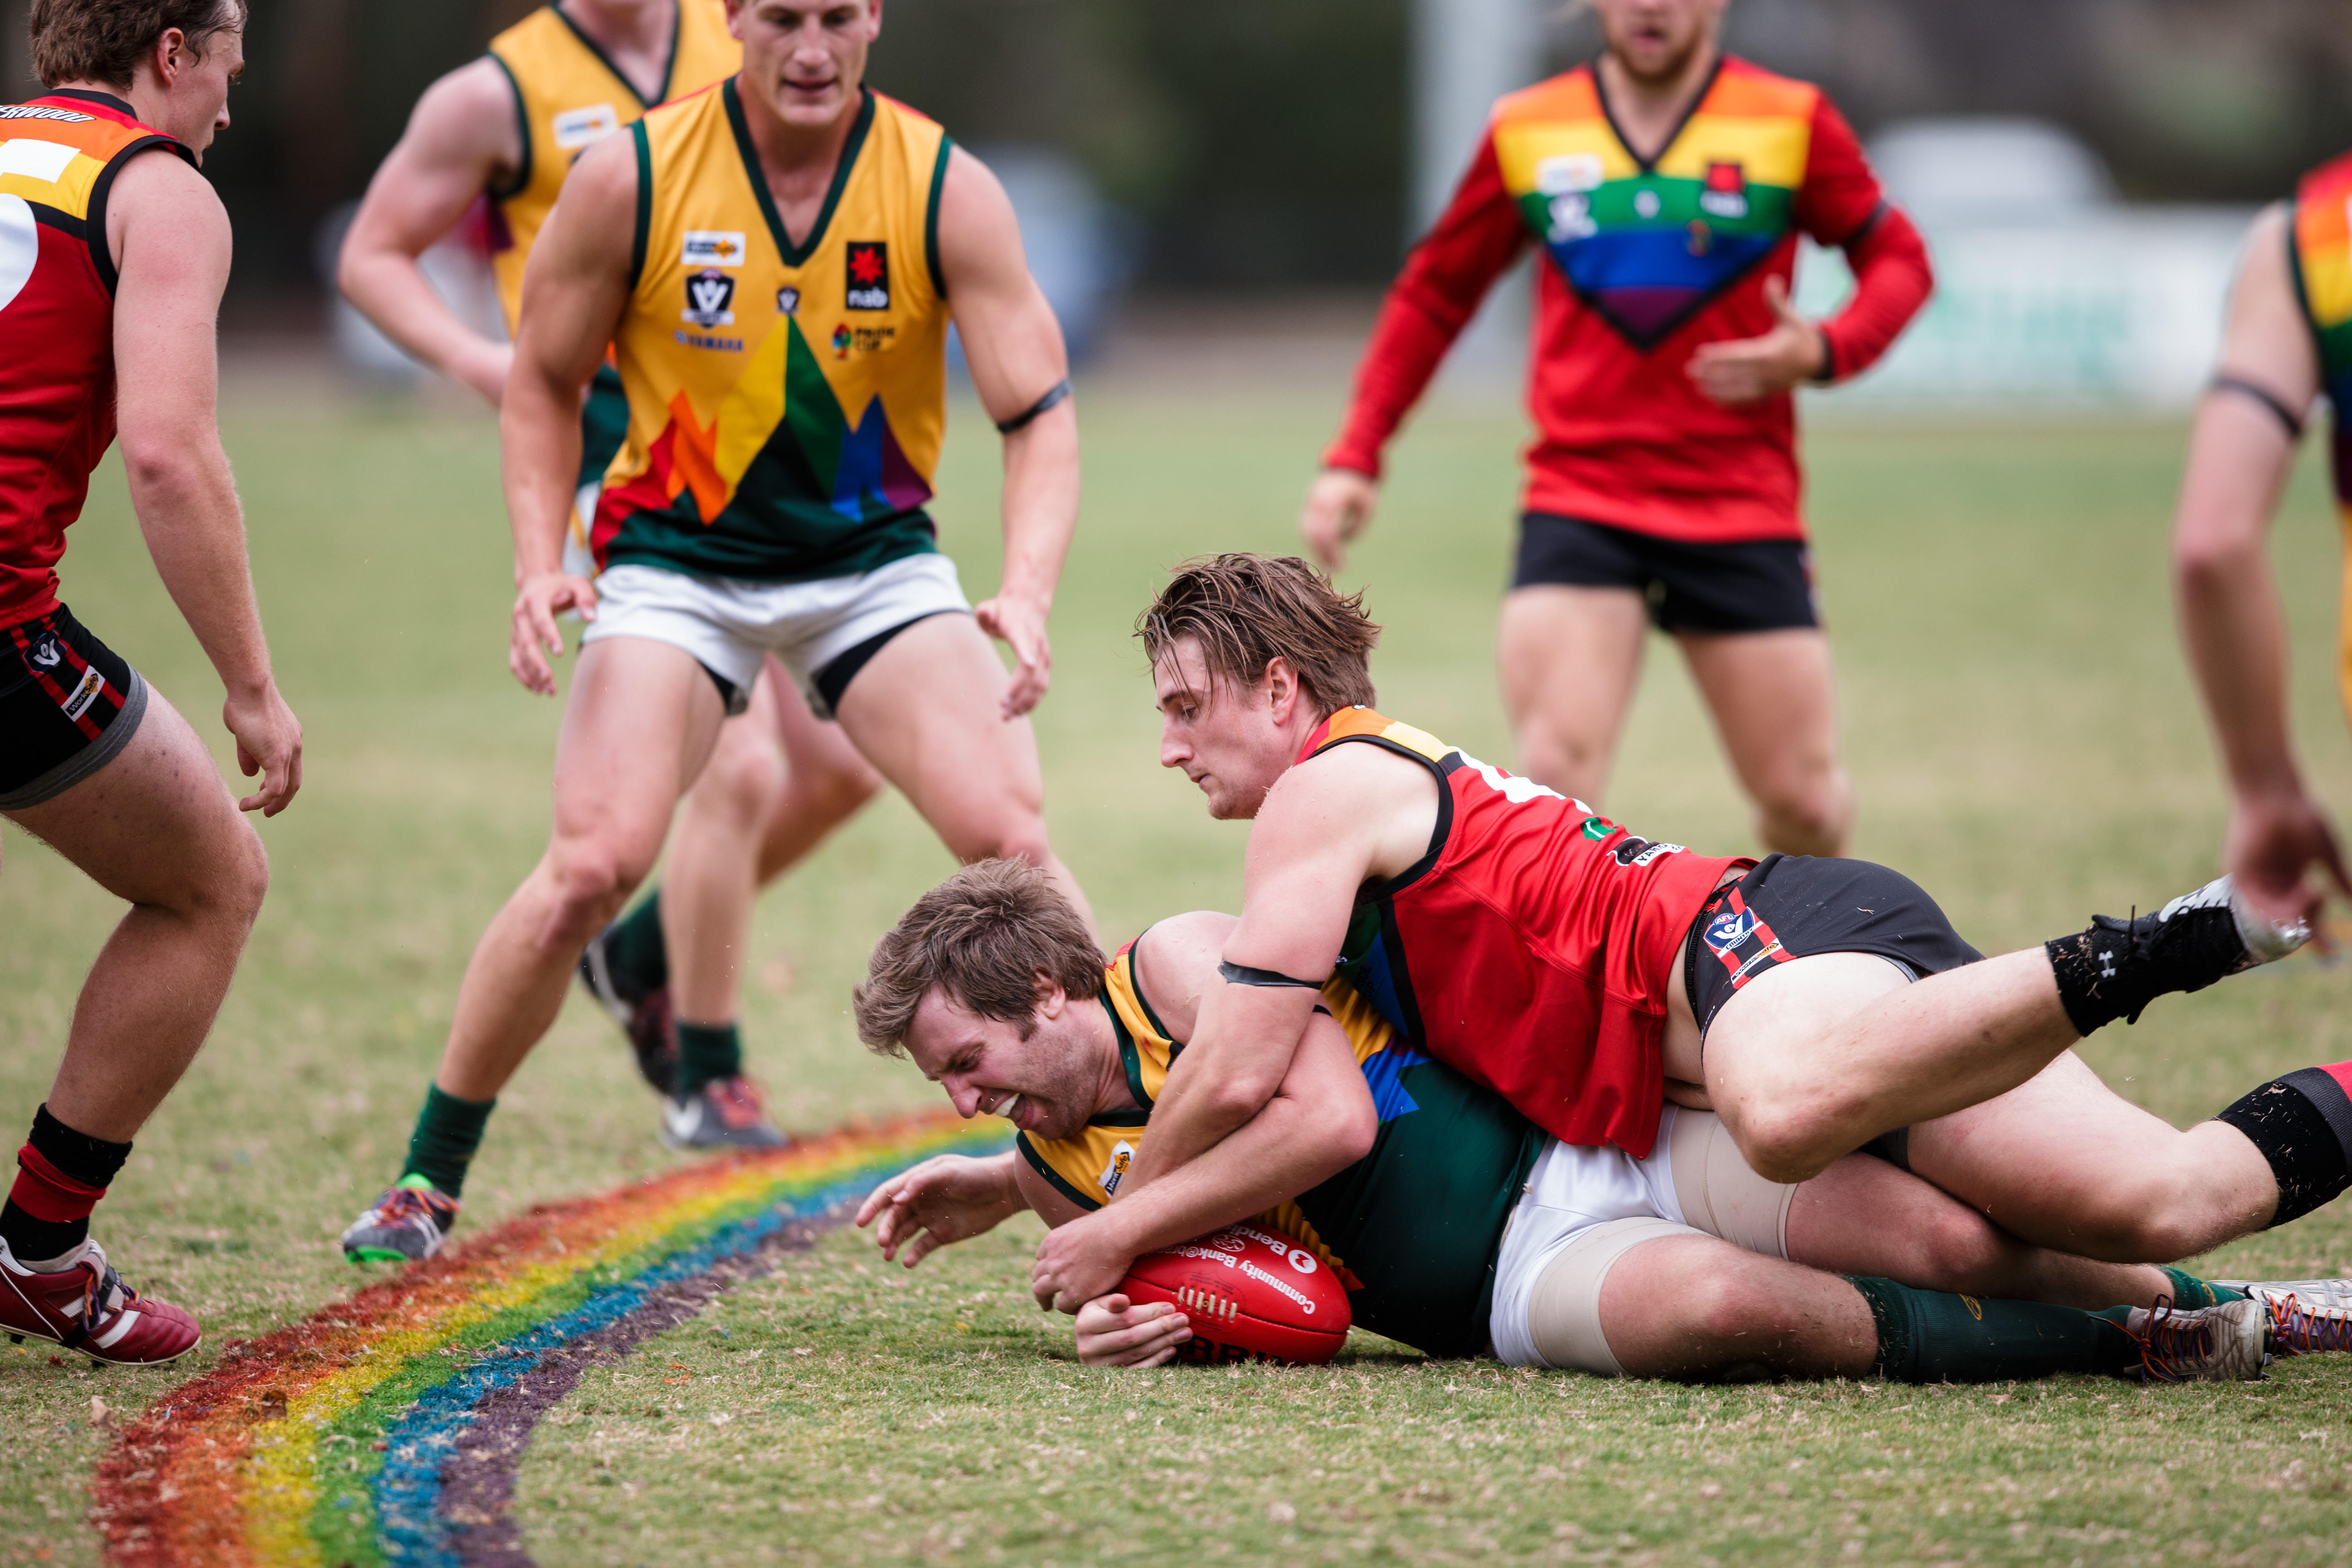 Pride Cup to celebrate LGBTI diversity and inclusion in sport